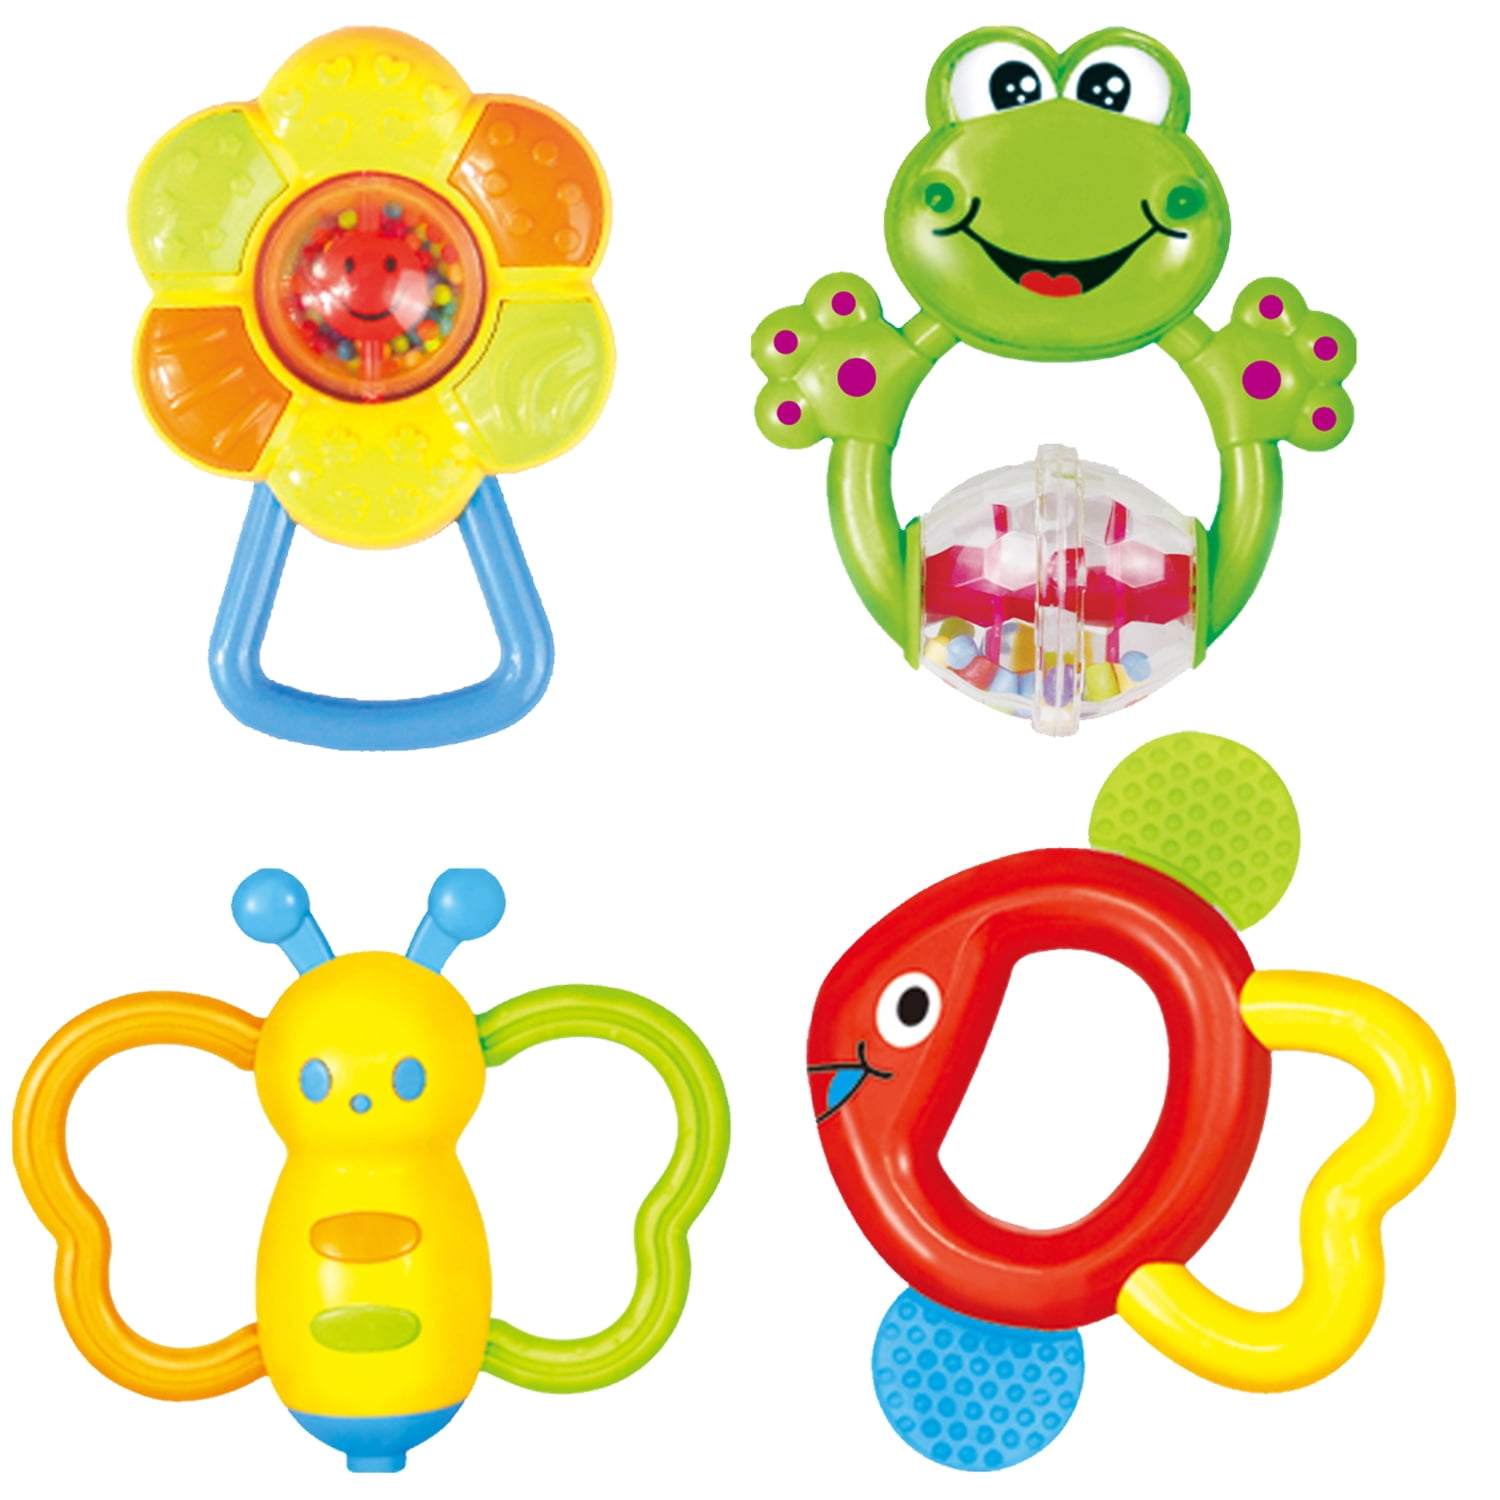 Baby Musical Instruments Toy Set Shaker Hand Bells Baby Rattles Sensory Teether 